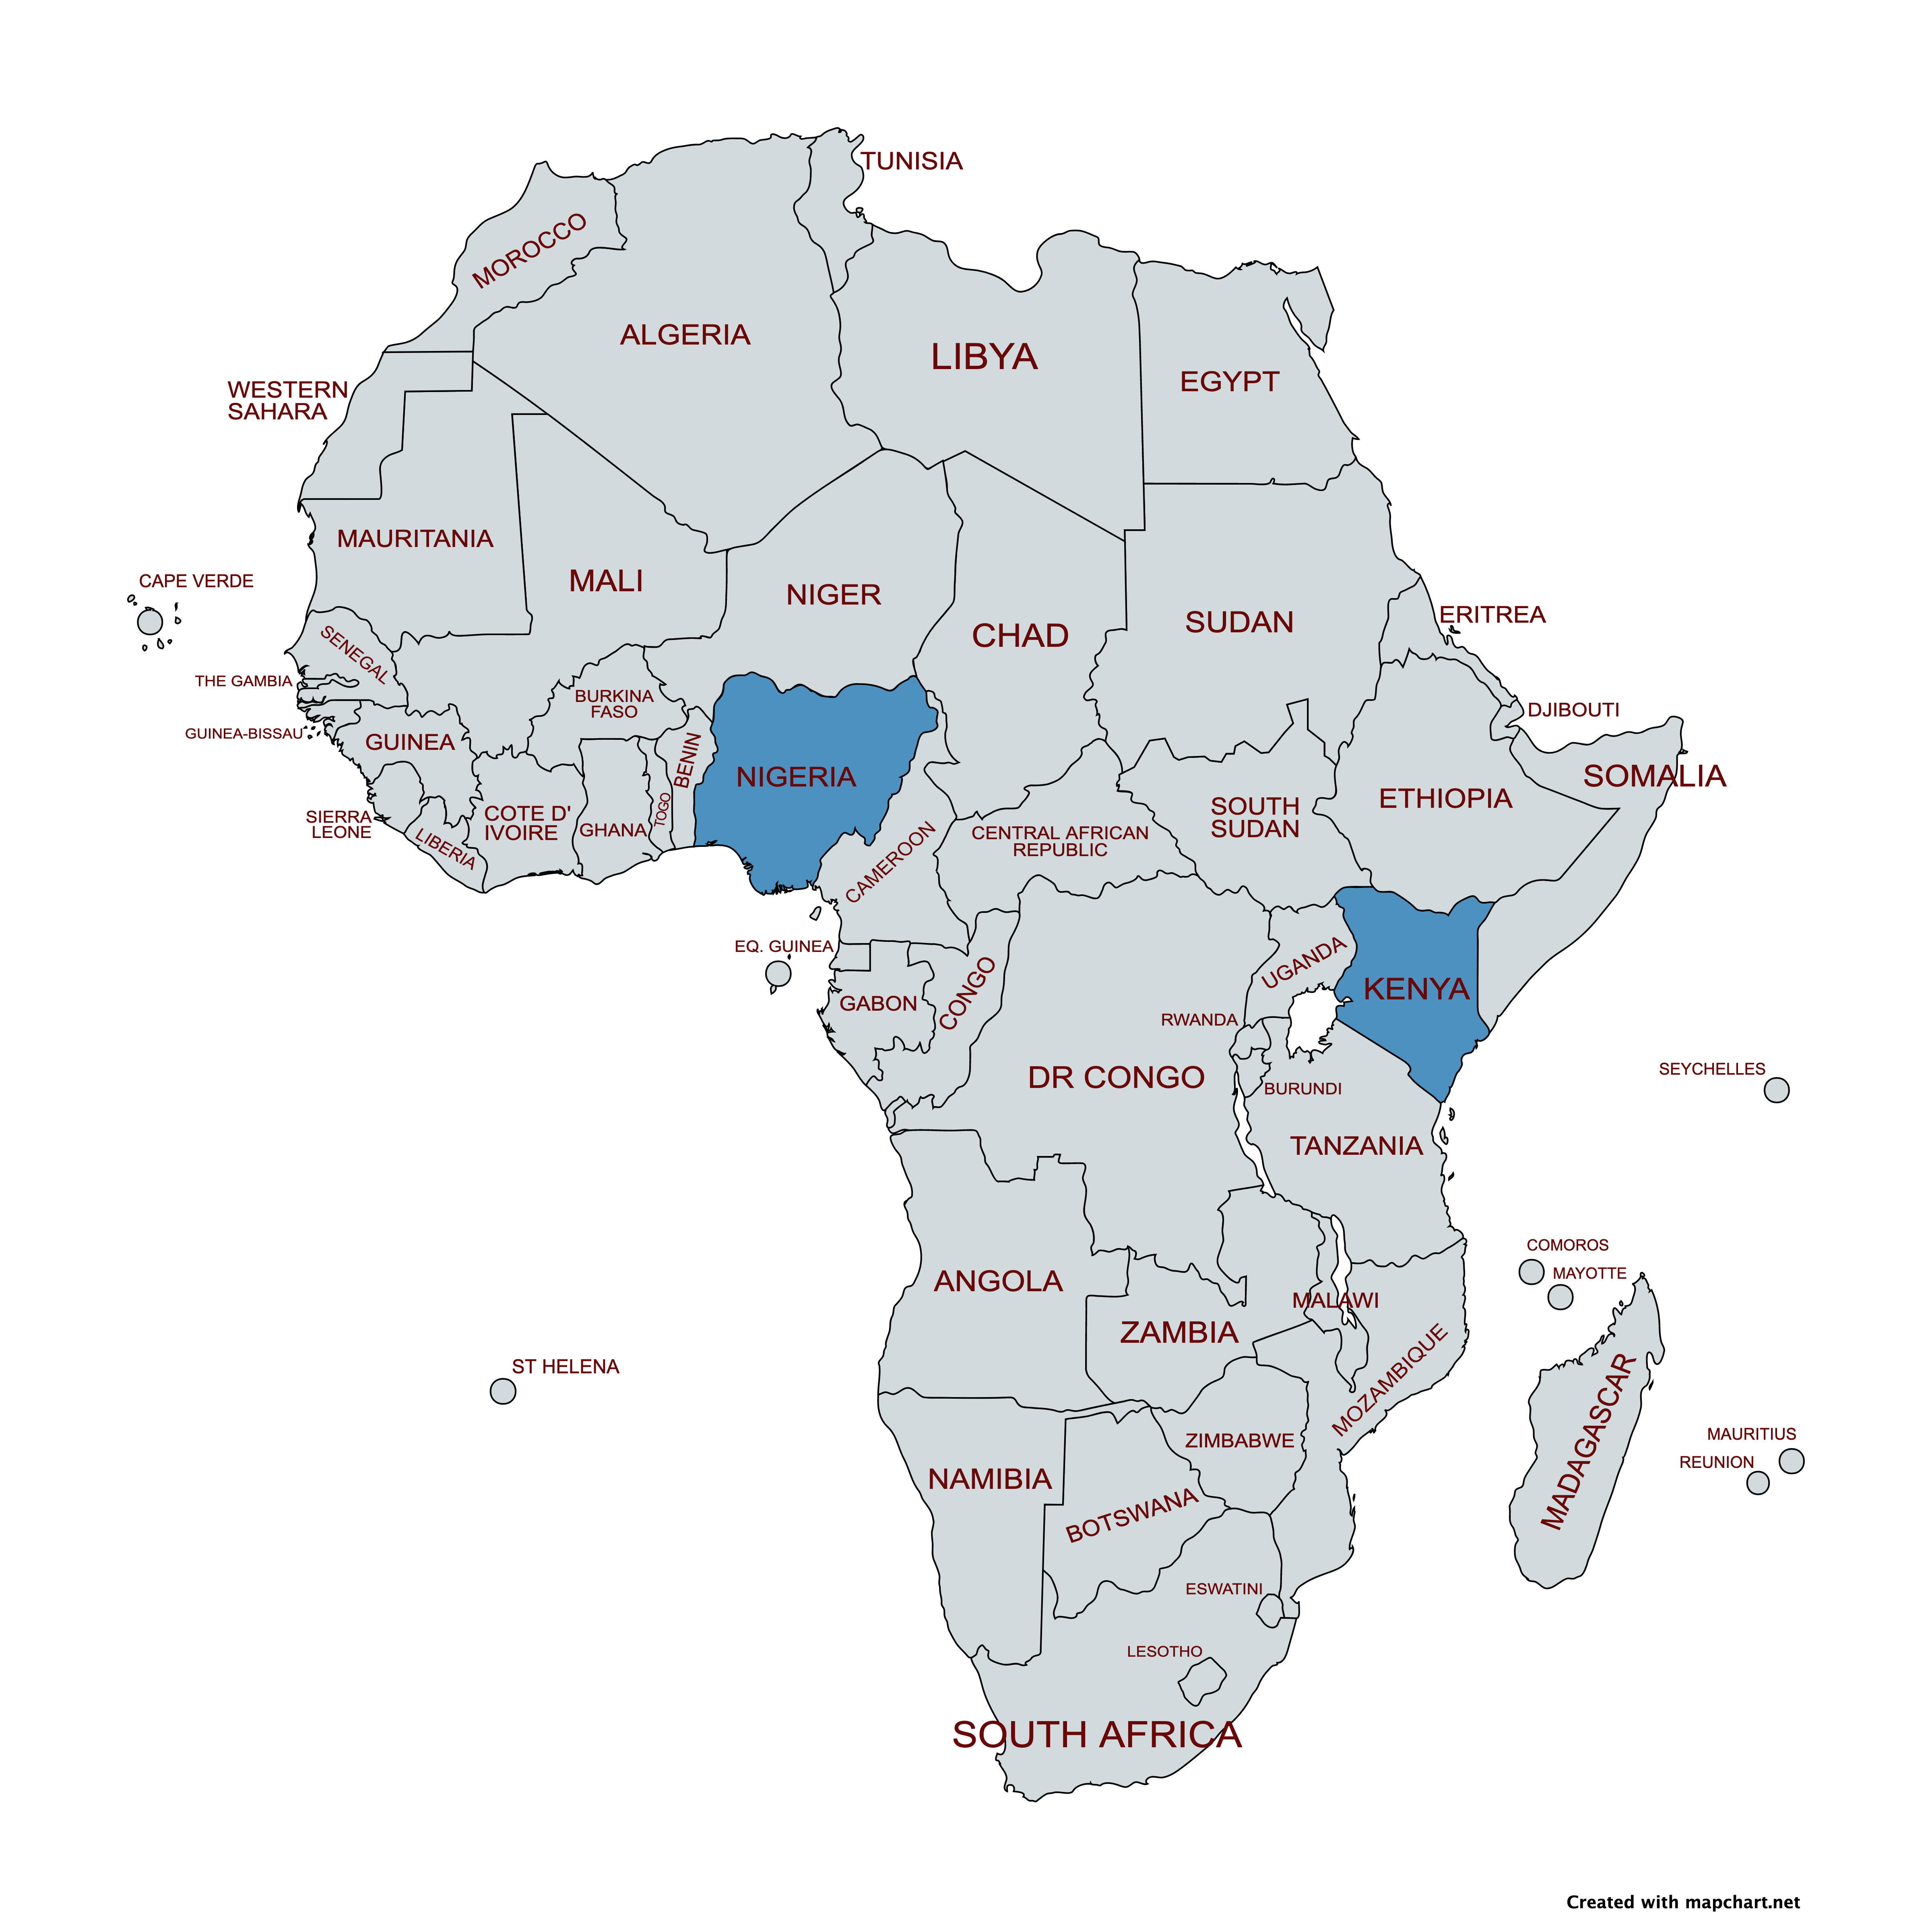 GBPP Africa Map